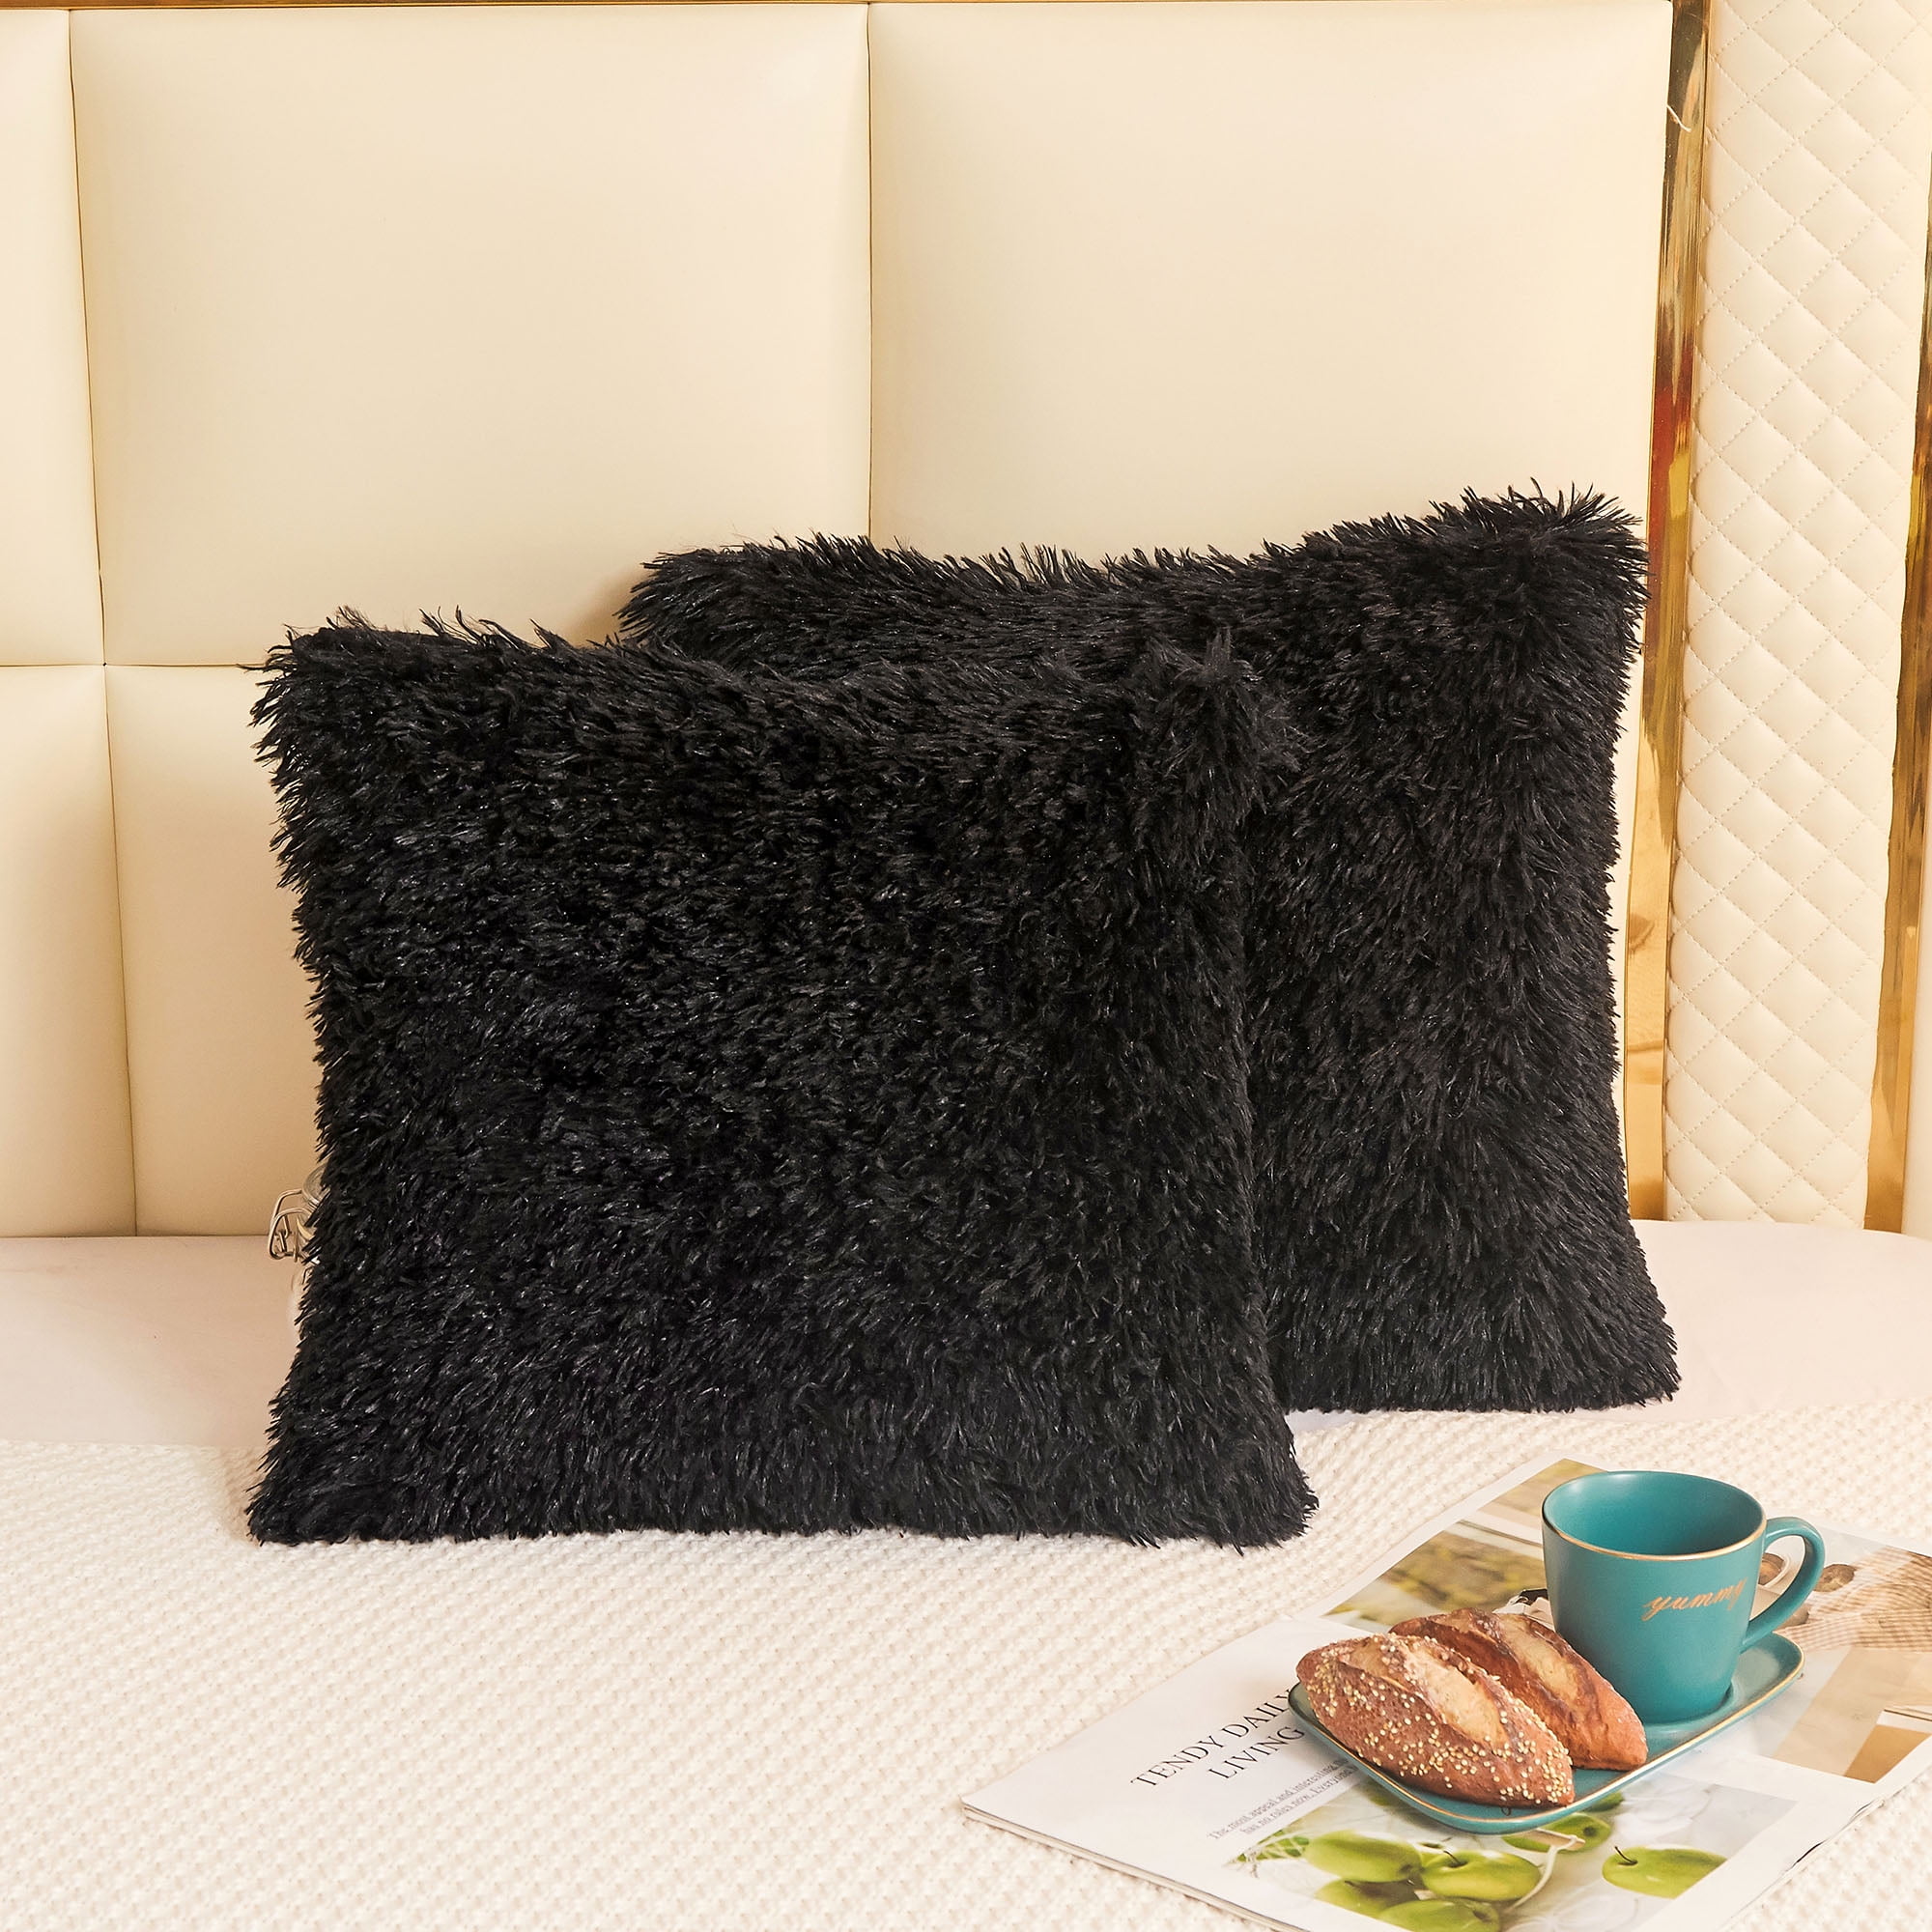 18-inch Plush Pillow – Luxury Square Accent Pillow Insert And Shag